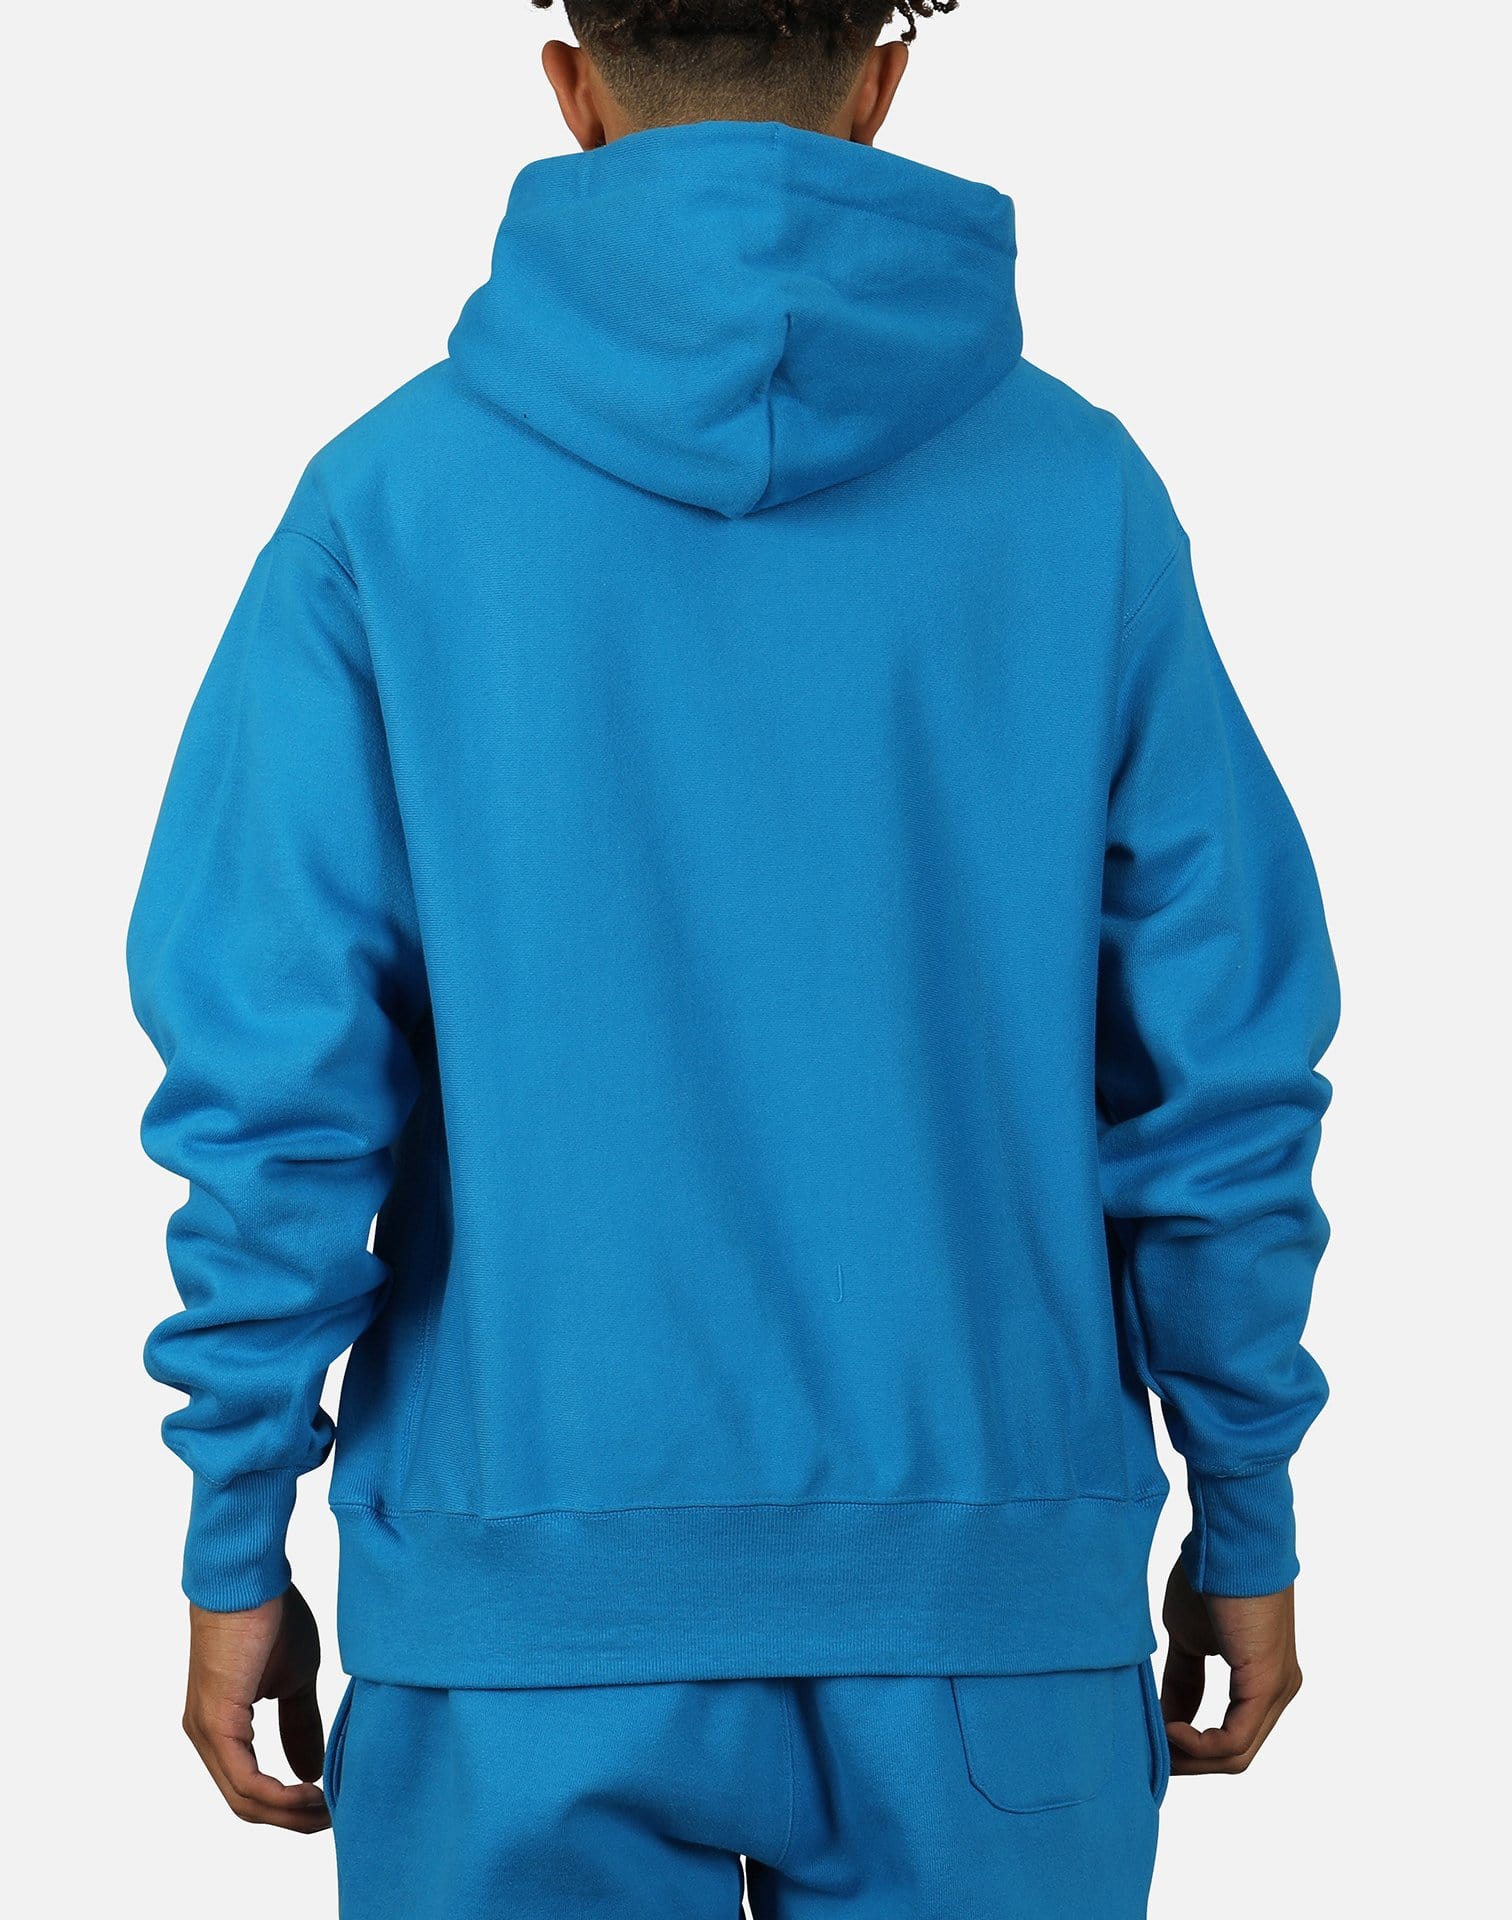 REVERSE WEAVE OLD ENGLISH PULLOVER HOODIE – DTLR